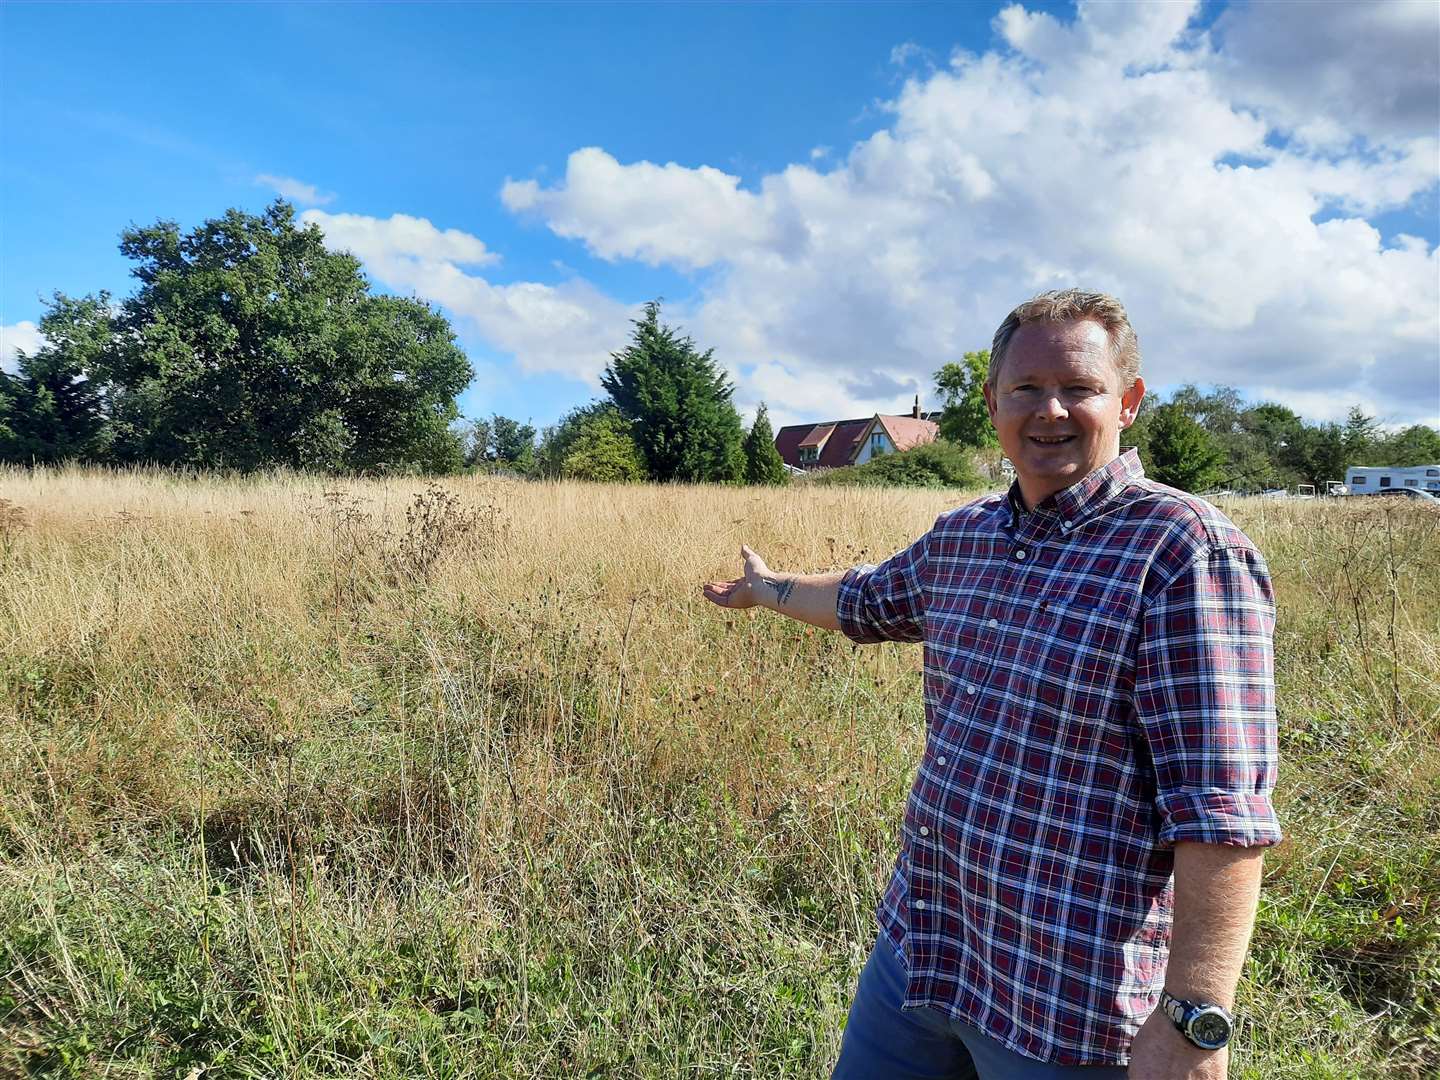 Mr Woodward is hoping to build the first carbon-neutral house of its kind on a plot in Hawthorn Corner, Herne Bay